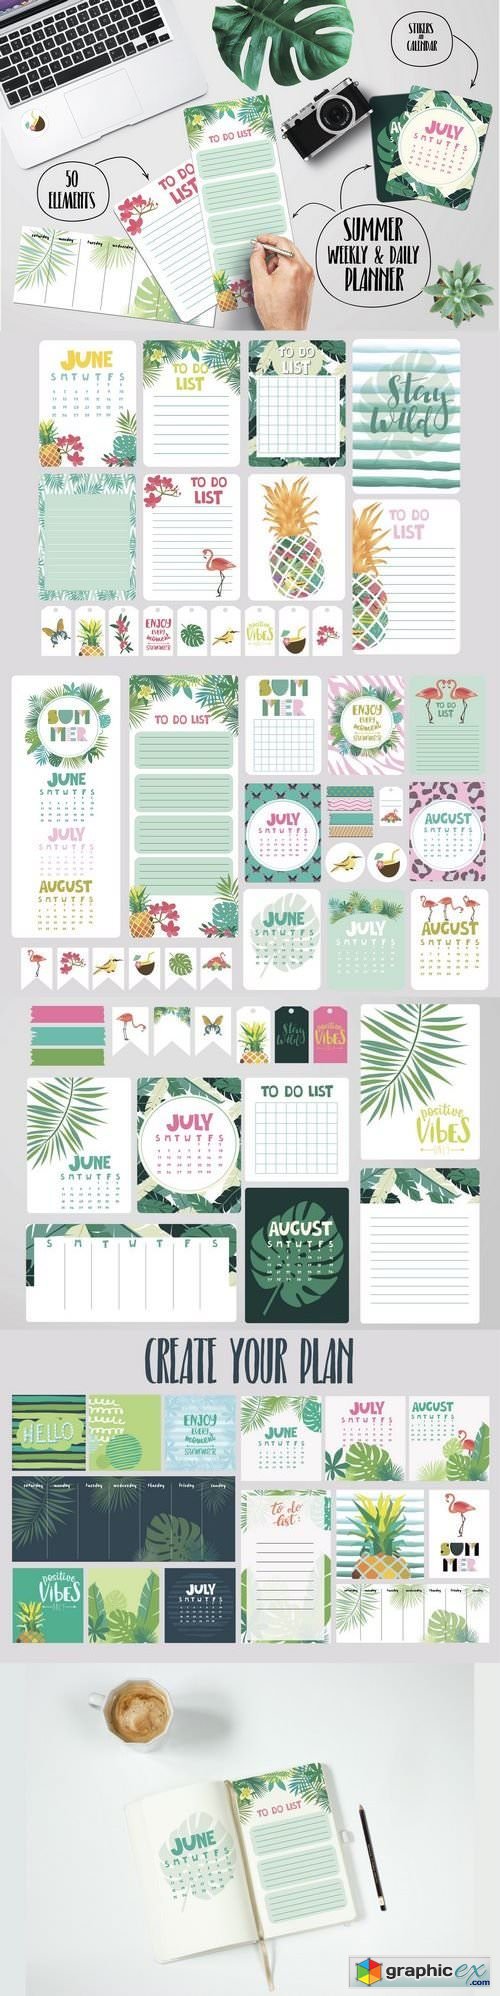 Weekly and daily summer planner